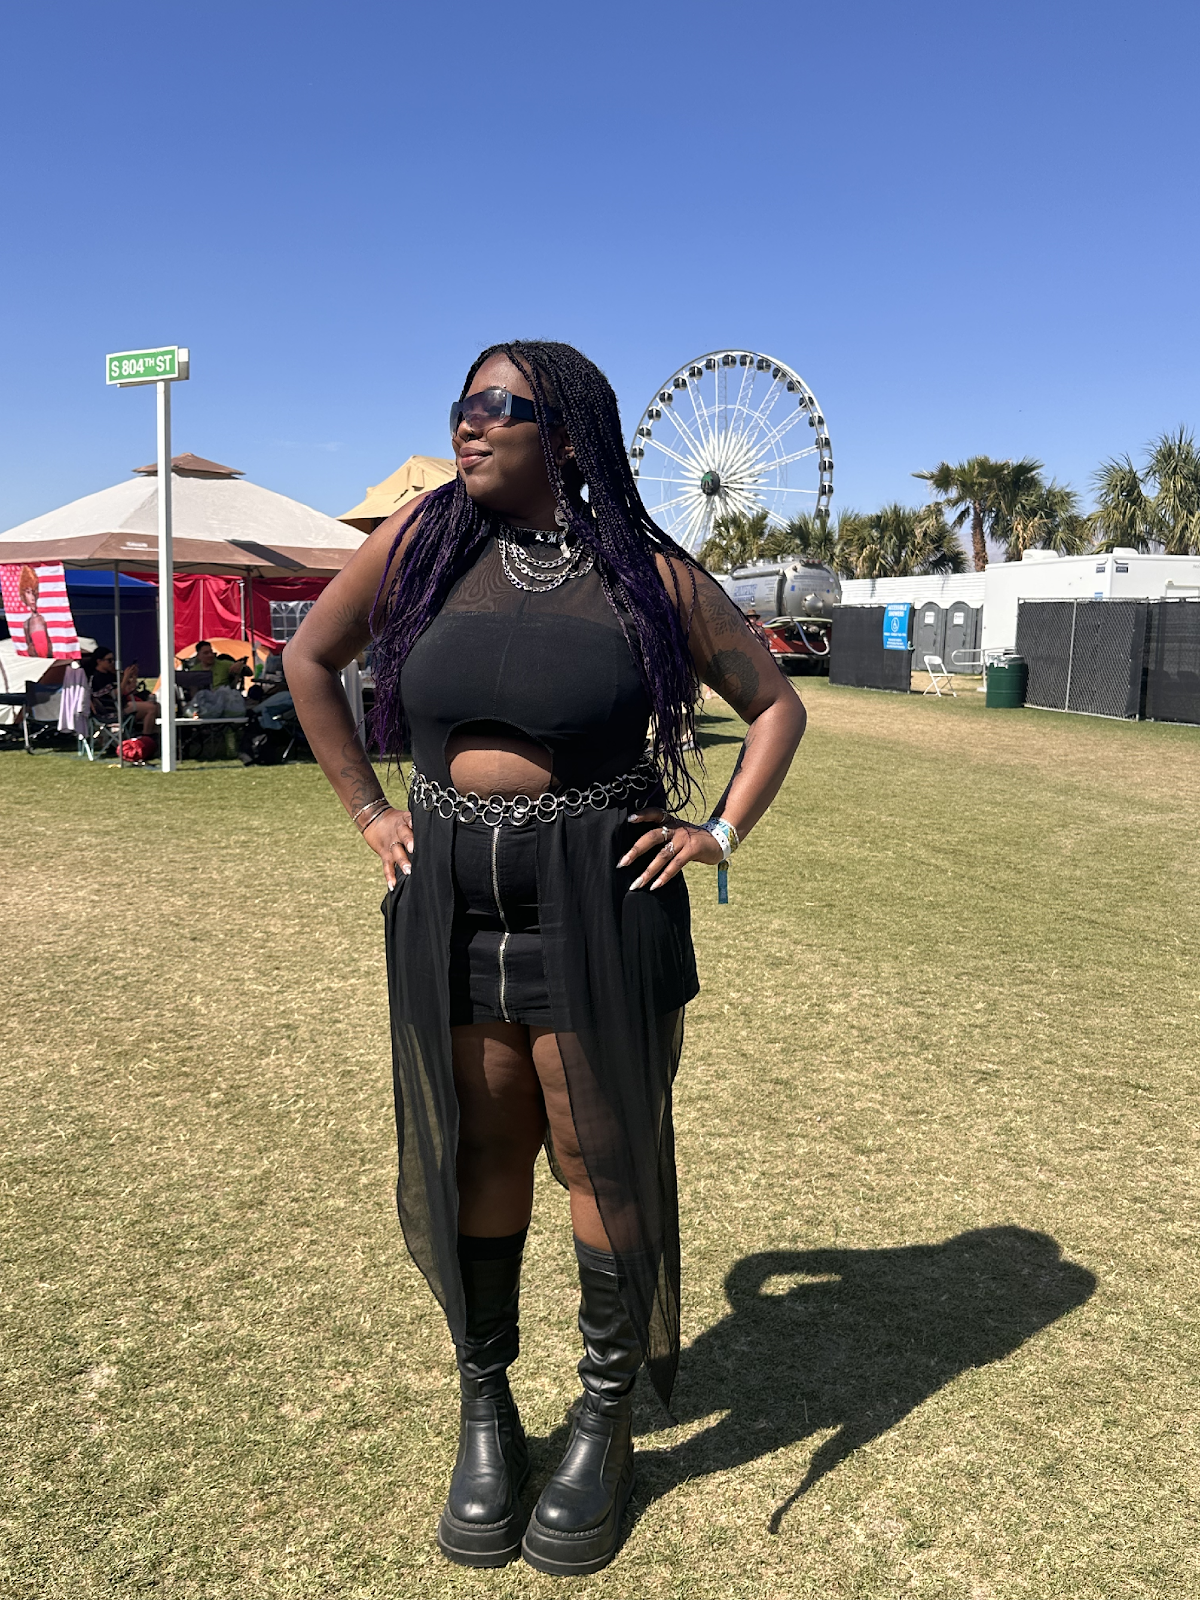 Cameryn, a dark-skinned woman participating in the Accessible+ program, is standing with her hands on her hips in a grassy field at Coachella. She has long black and purple locs, is wearing black shades, a black top with a circle cutout on the bottom, an intricate belt, a black zip skirt, a black sheer long skirt, and black boots with silver necklaces. The sun is bright, casting a hard shadow of her onto the ground.